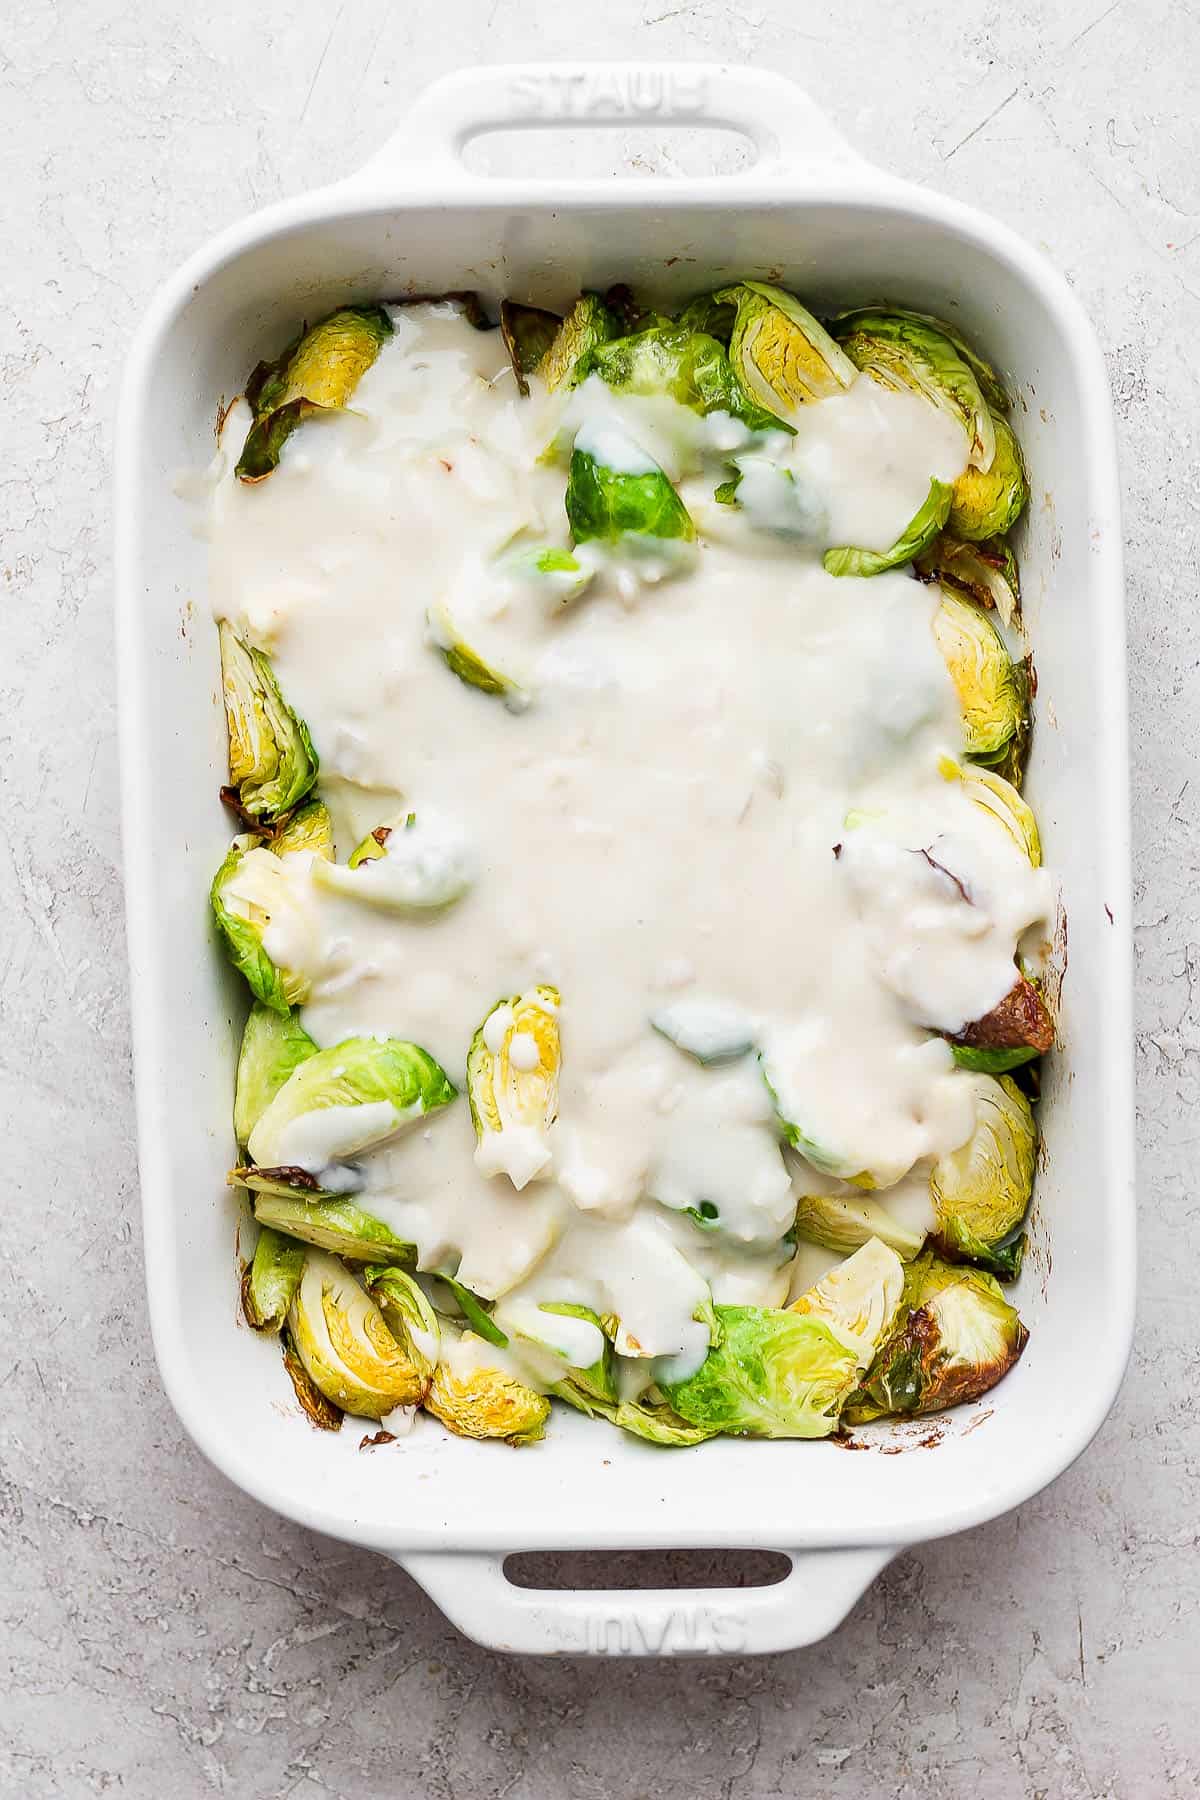 Cheese mixture poured over the top of the roasted brussels sprouts.